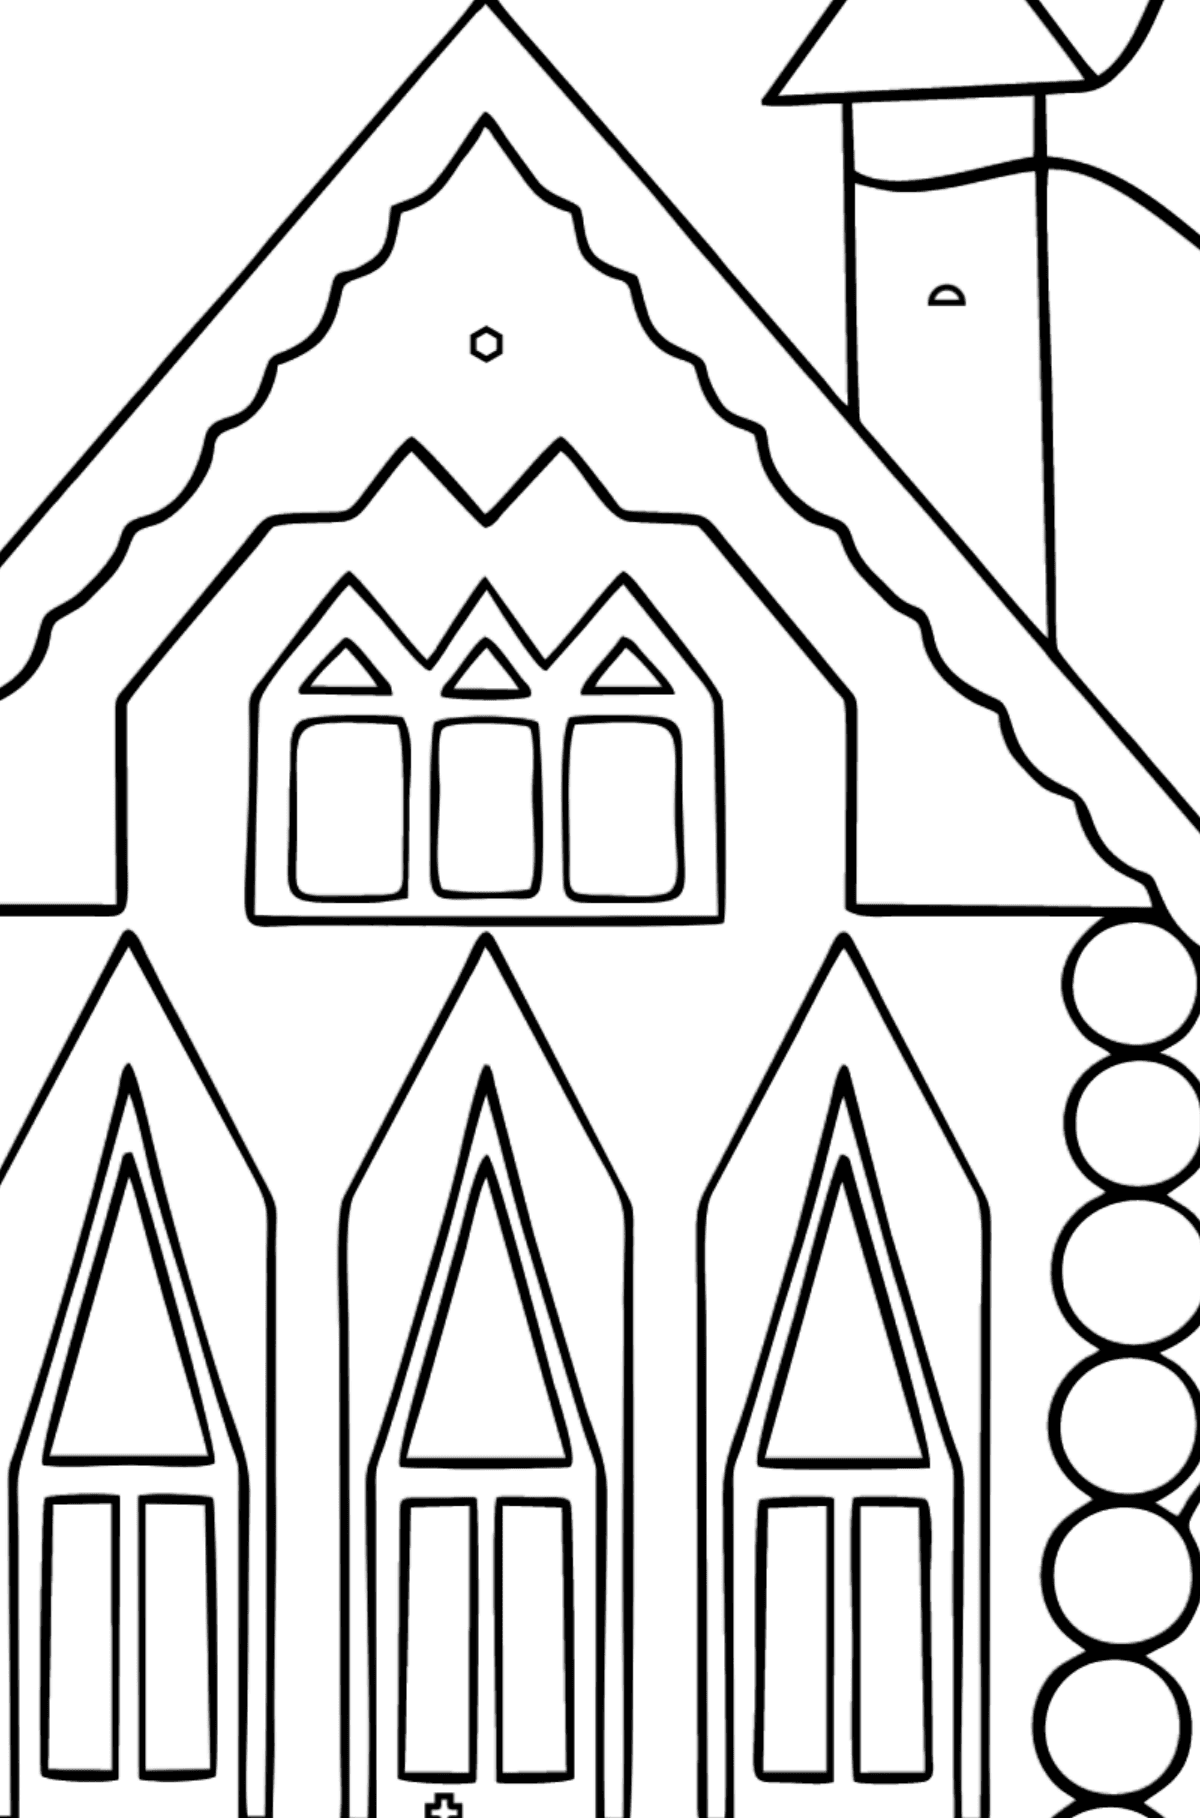 Simple Coloring Page - A Rainbow House - Coloring by Geometric Shapes for Kids